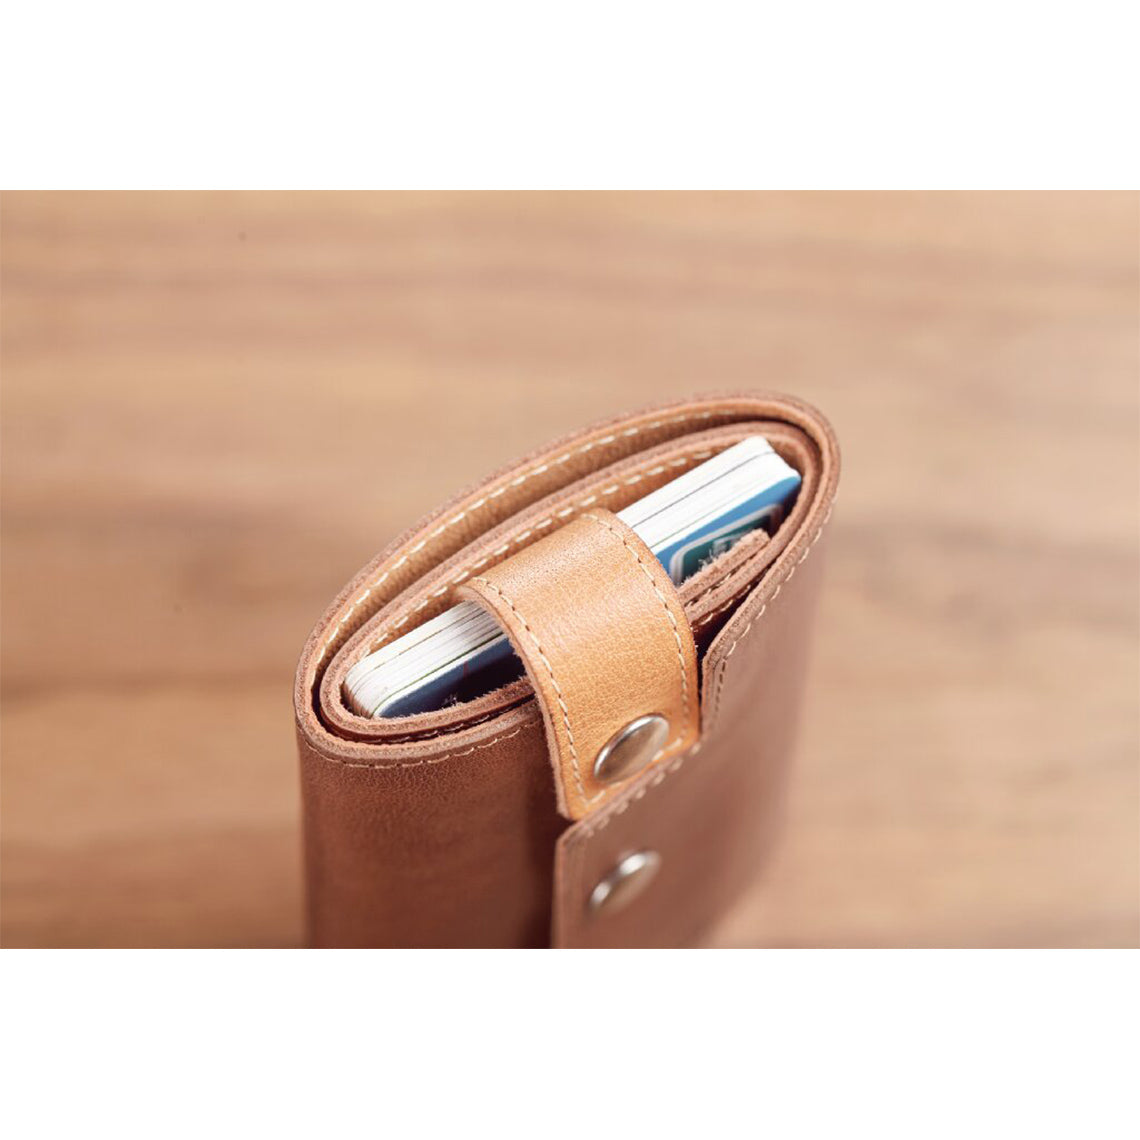 Real Leather Card Holder & Money Clip for Men and Women | Brown - POPSEWING™